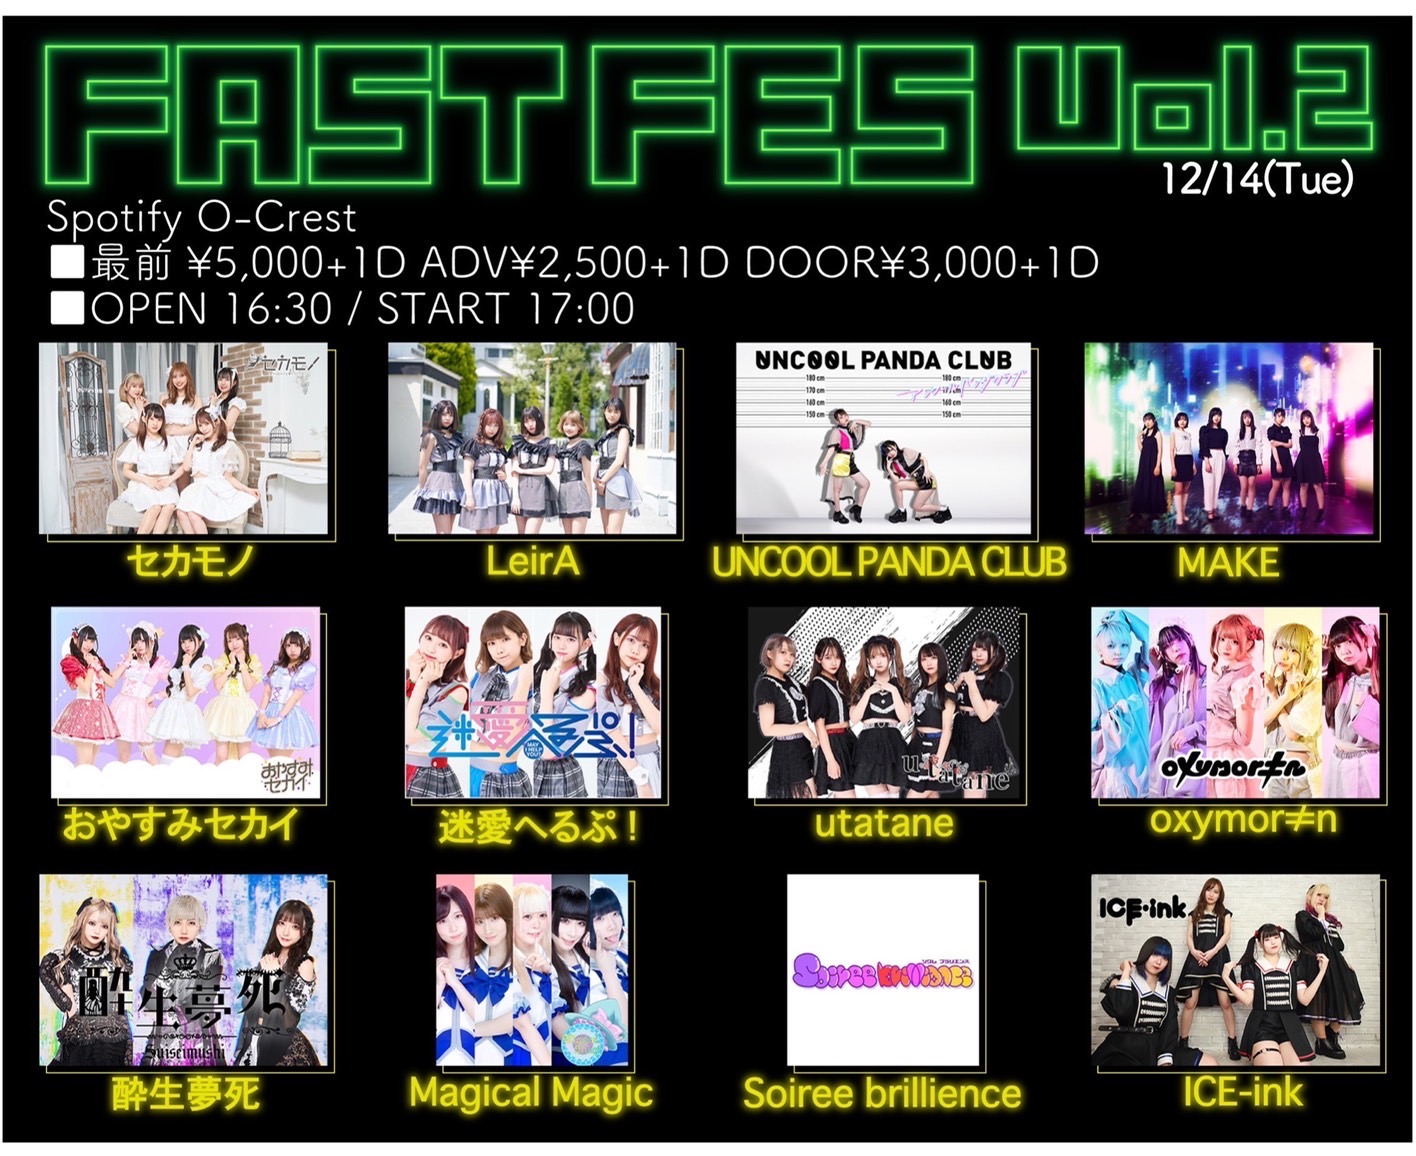 FASTFES Vol.2